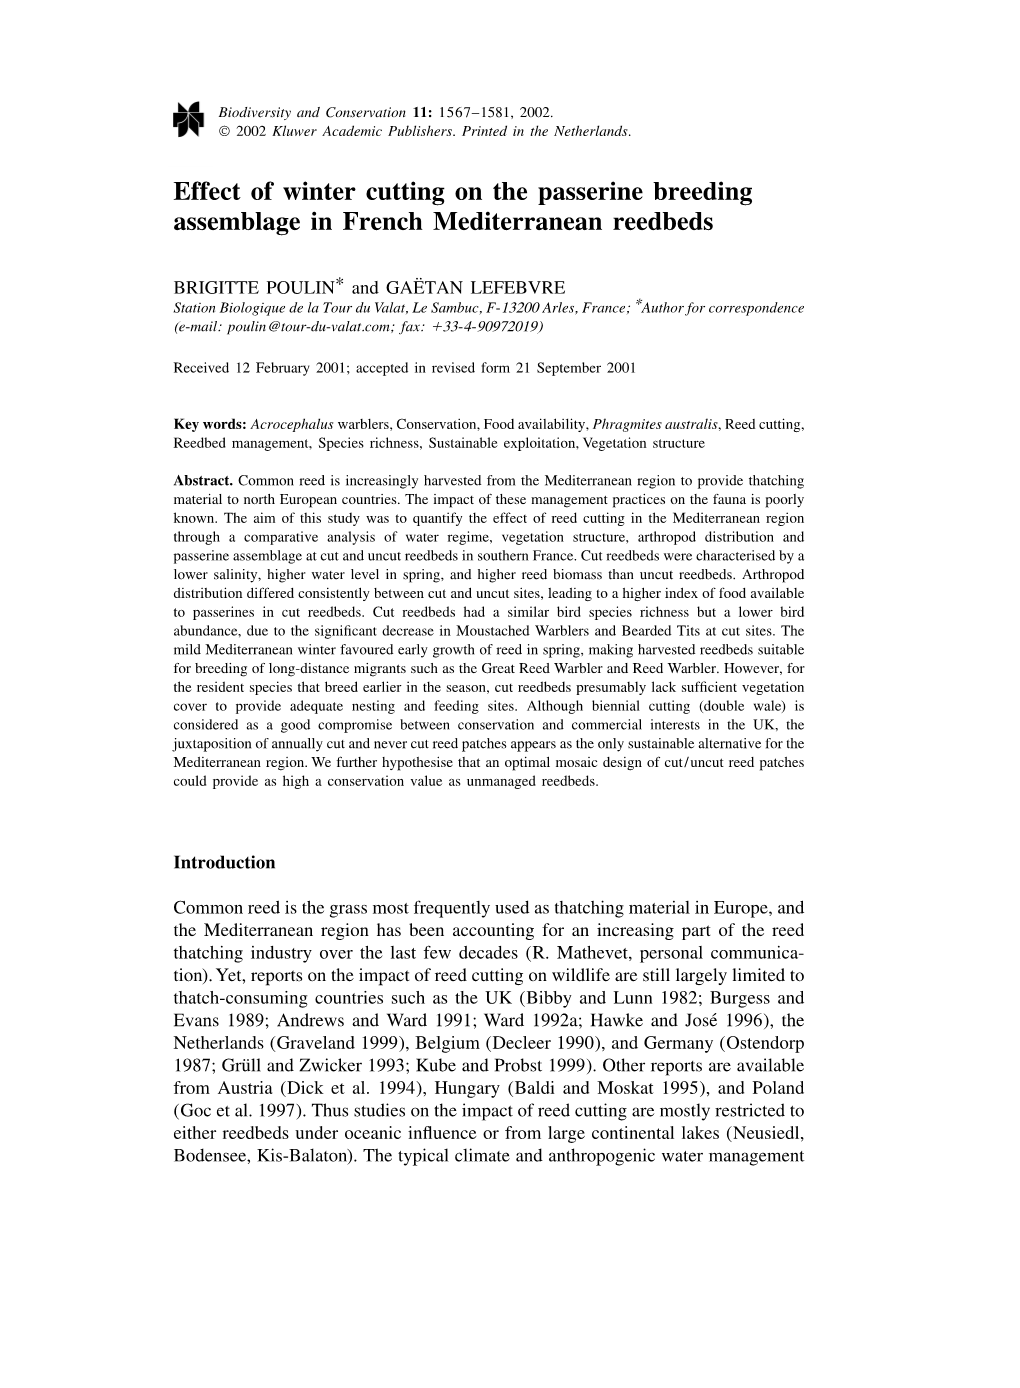 Effect of Winter Cutting on the Passerine Breeding Assemblage in French Mediterranean Reedbeds